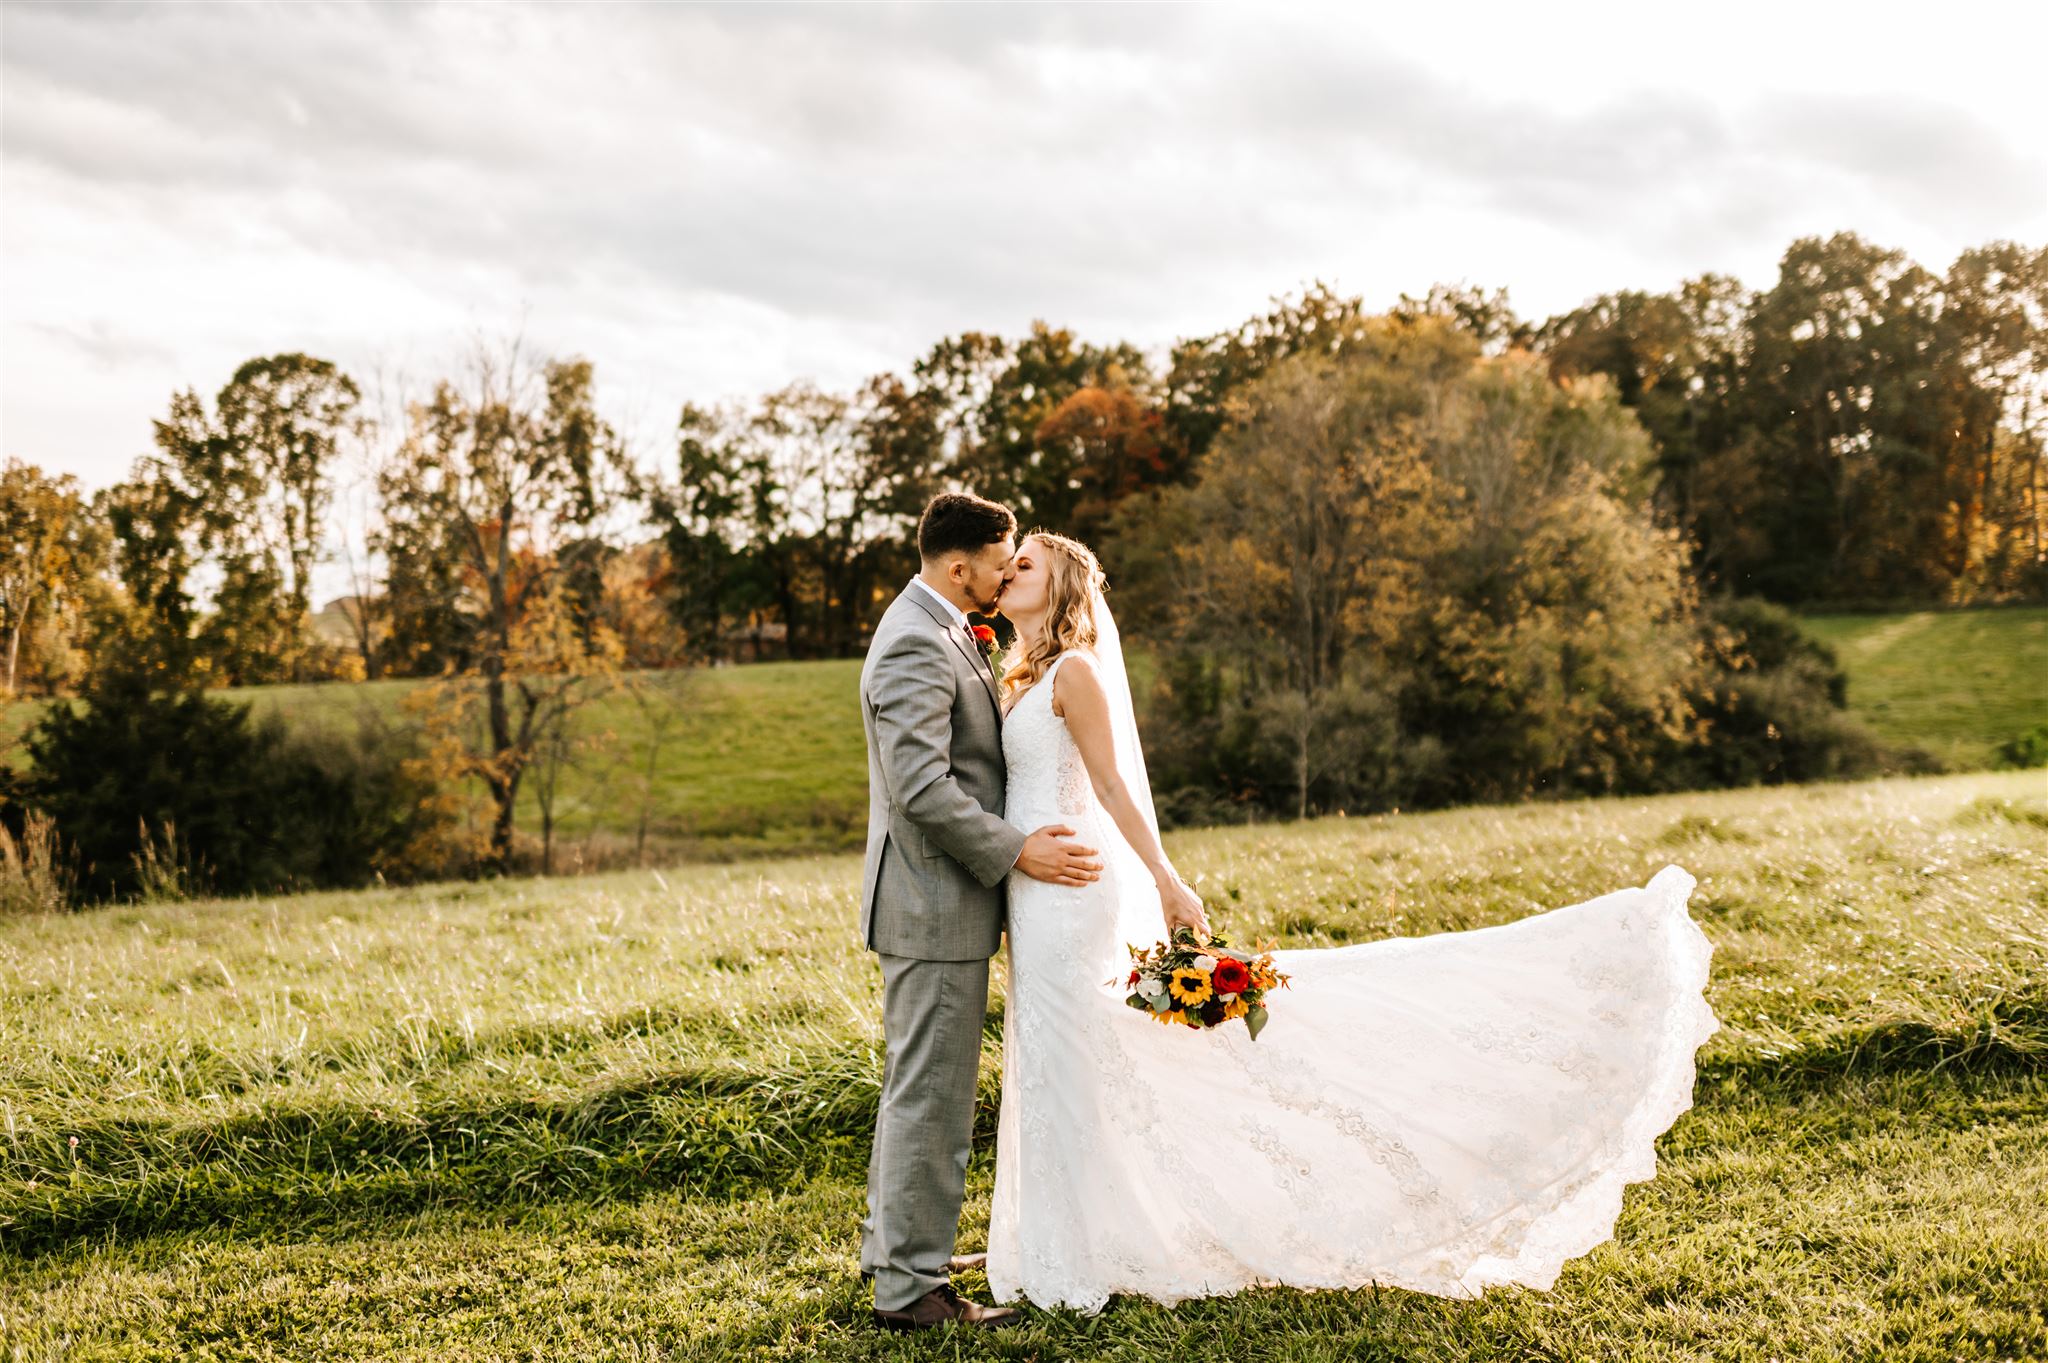 bride and groom kissing as the brides wedding dress blows in the wind in a field at their outdoor Charlottesville wedding venue